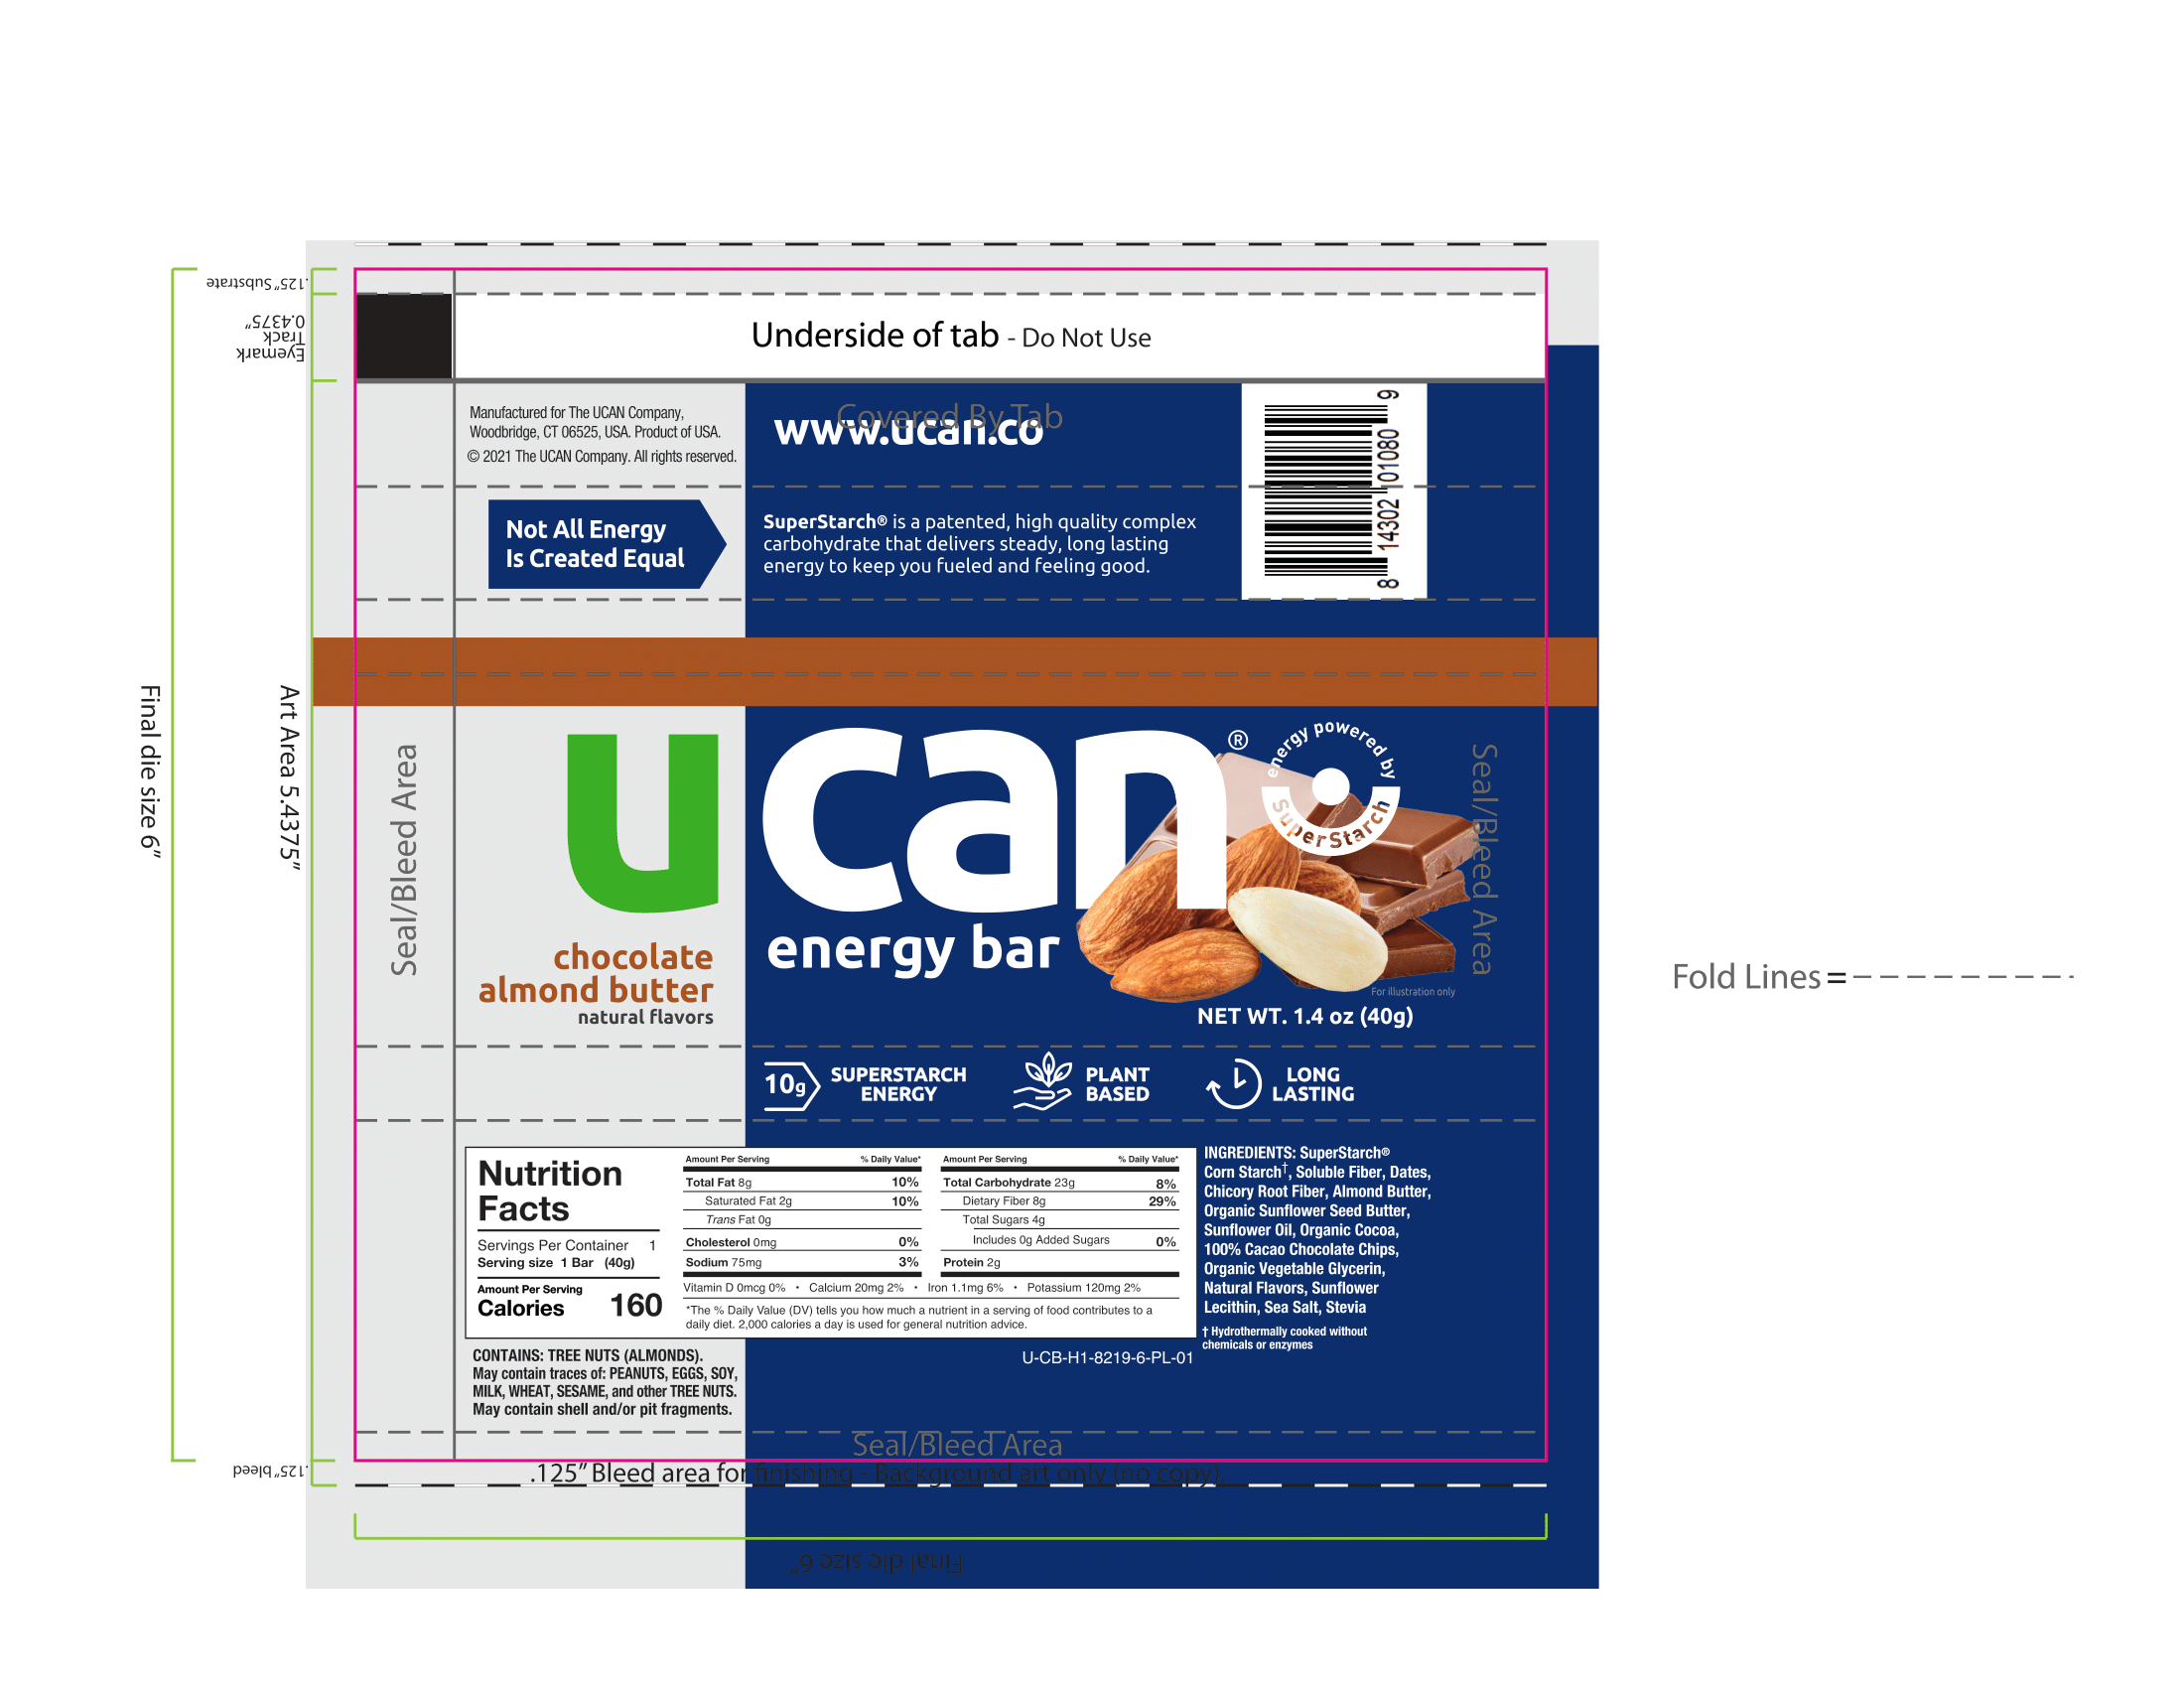 UCAN Snack Bar Box - Chocolate Almond 6 innerpacks per case 1.1 lbs Product Label